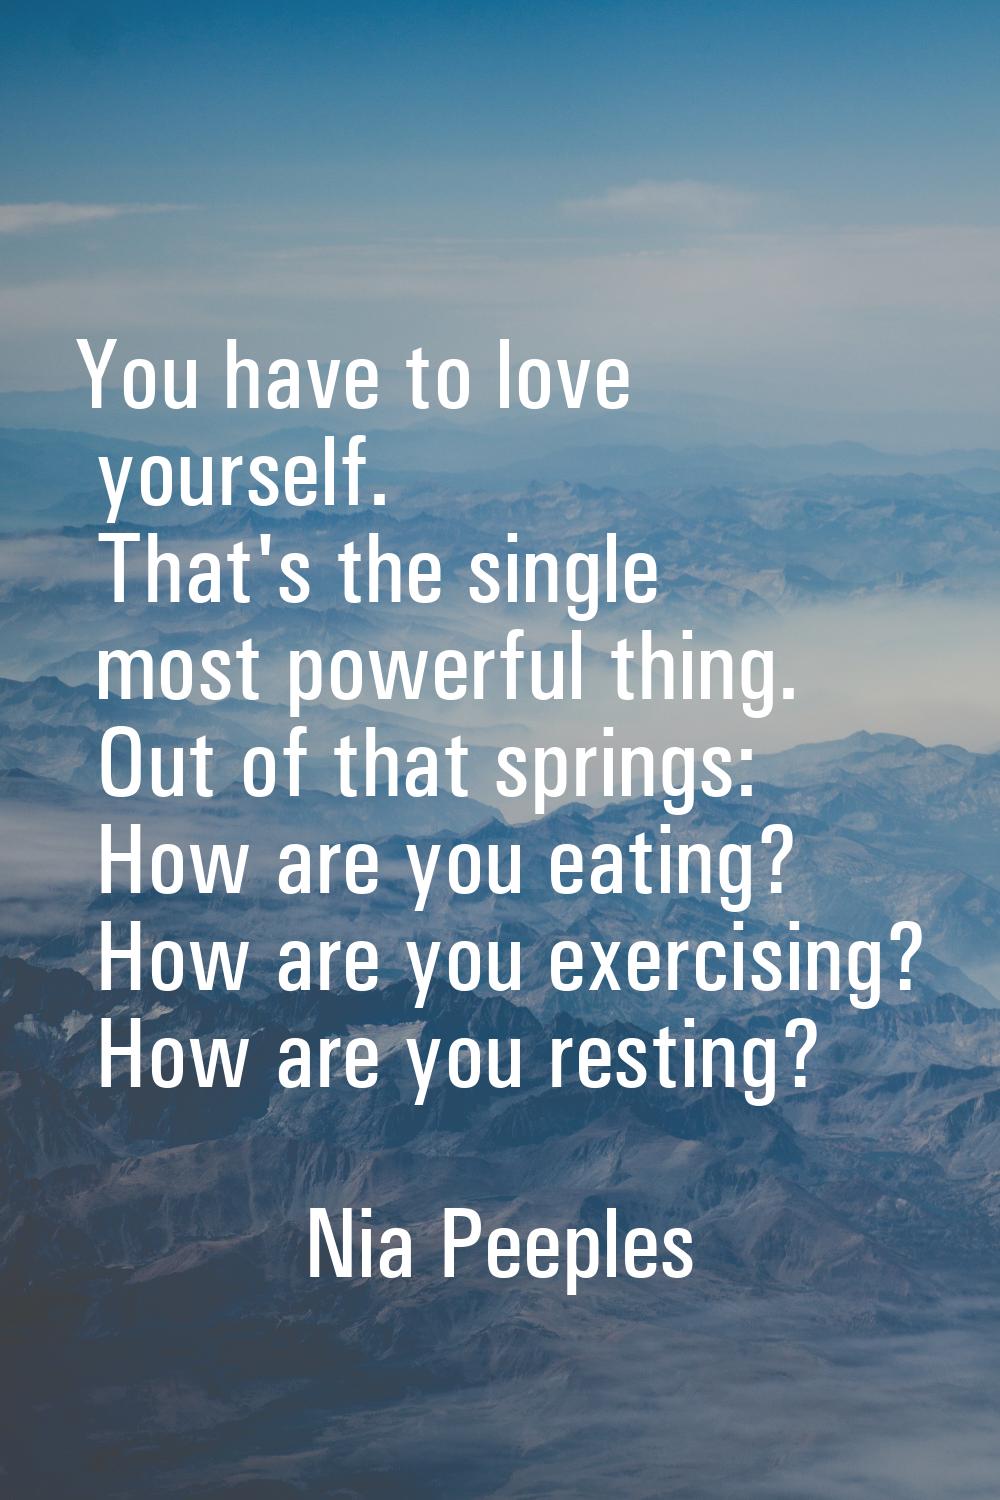 You have to love yourself. That's the single most powerful thing. Out of that springs: How are you 